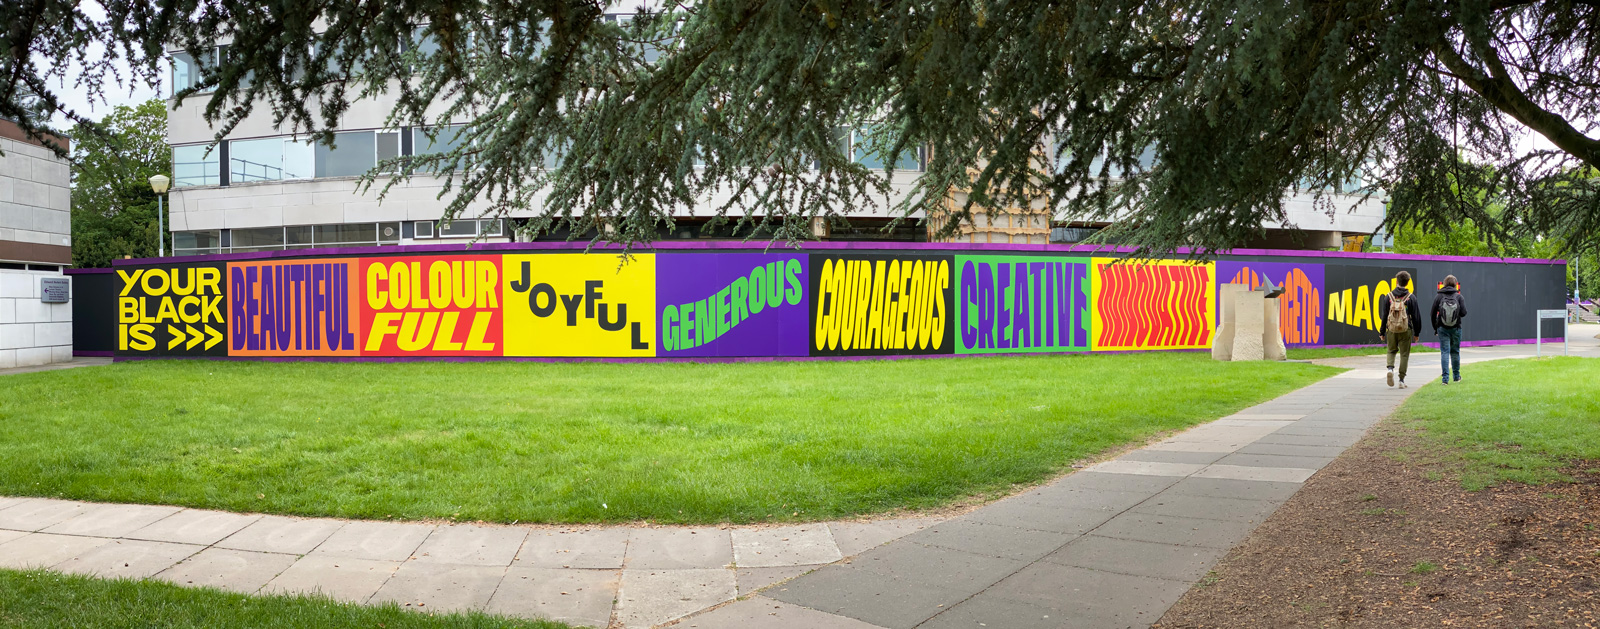 A 30 metre wide mural installed on campus featuring graphic words and colourfully designed squares.